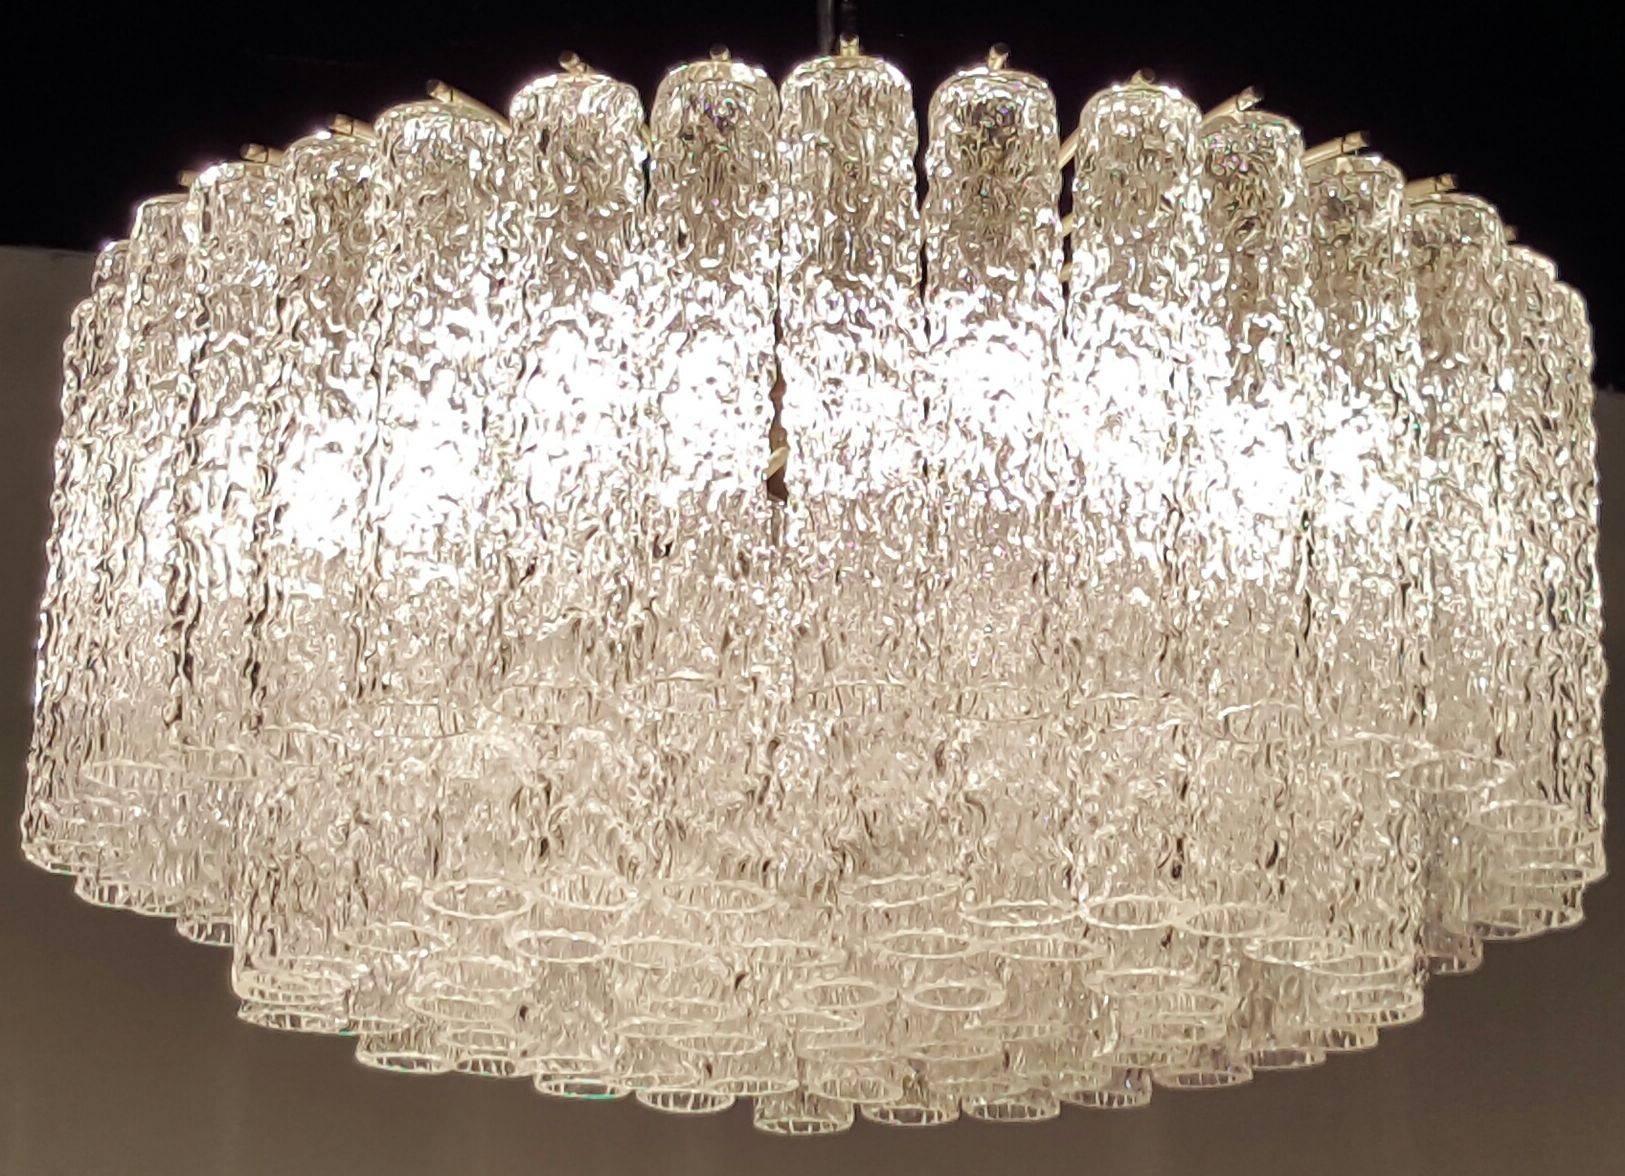 Great size and shape chandelier by Venini, circa 1950. Not a single chip on this gorgeous chandelier and the bottom of all the crystals are polished. Missing original canopy but could be used as nearly a flush mount due to size and scale.